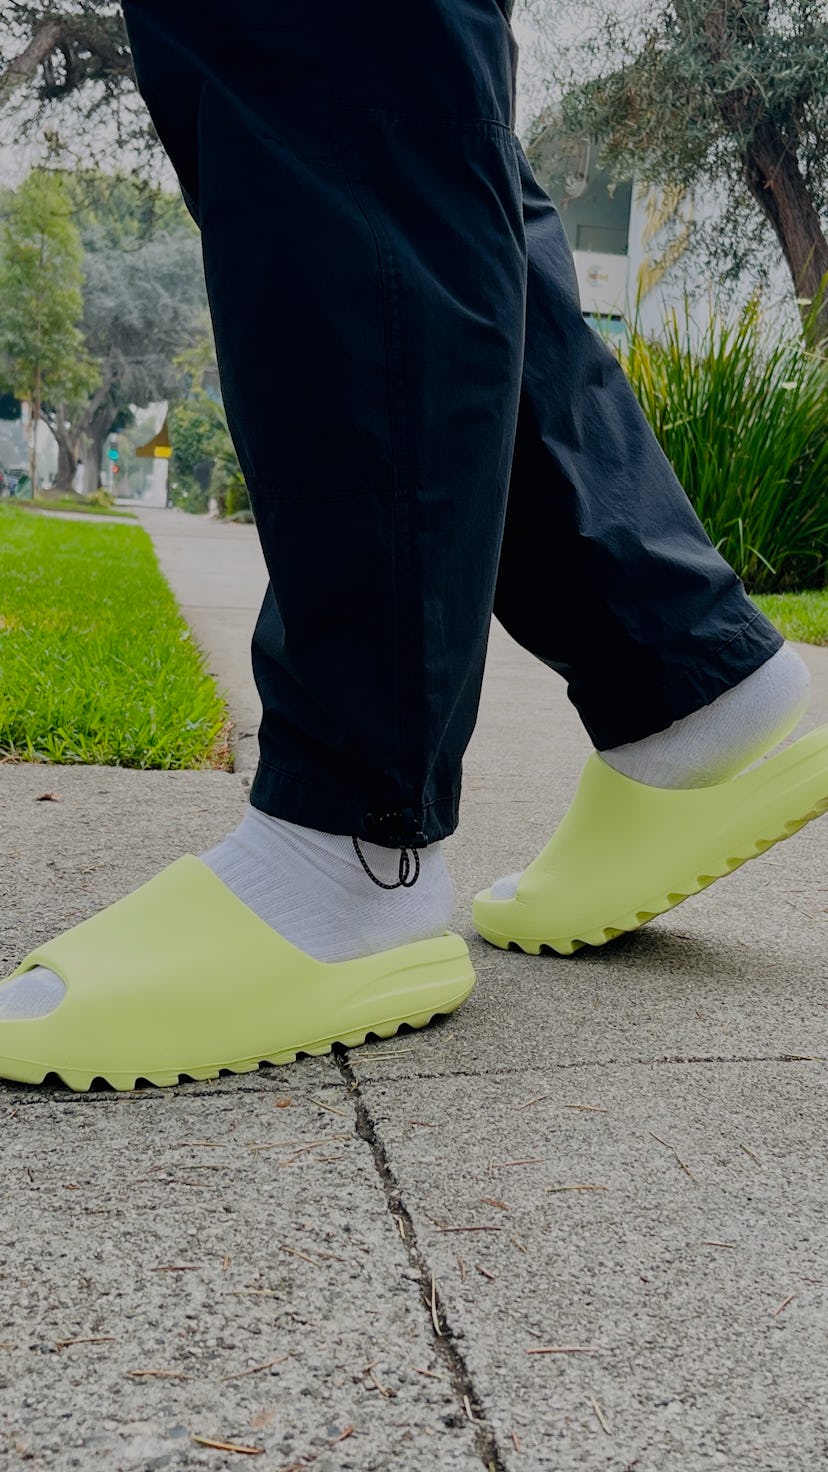 Adidas Yeezy Slides Glow Green Kanye West review on feet